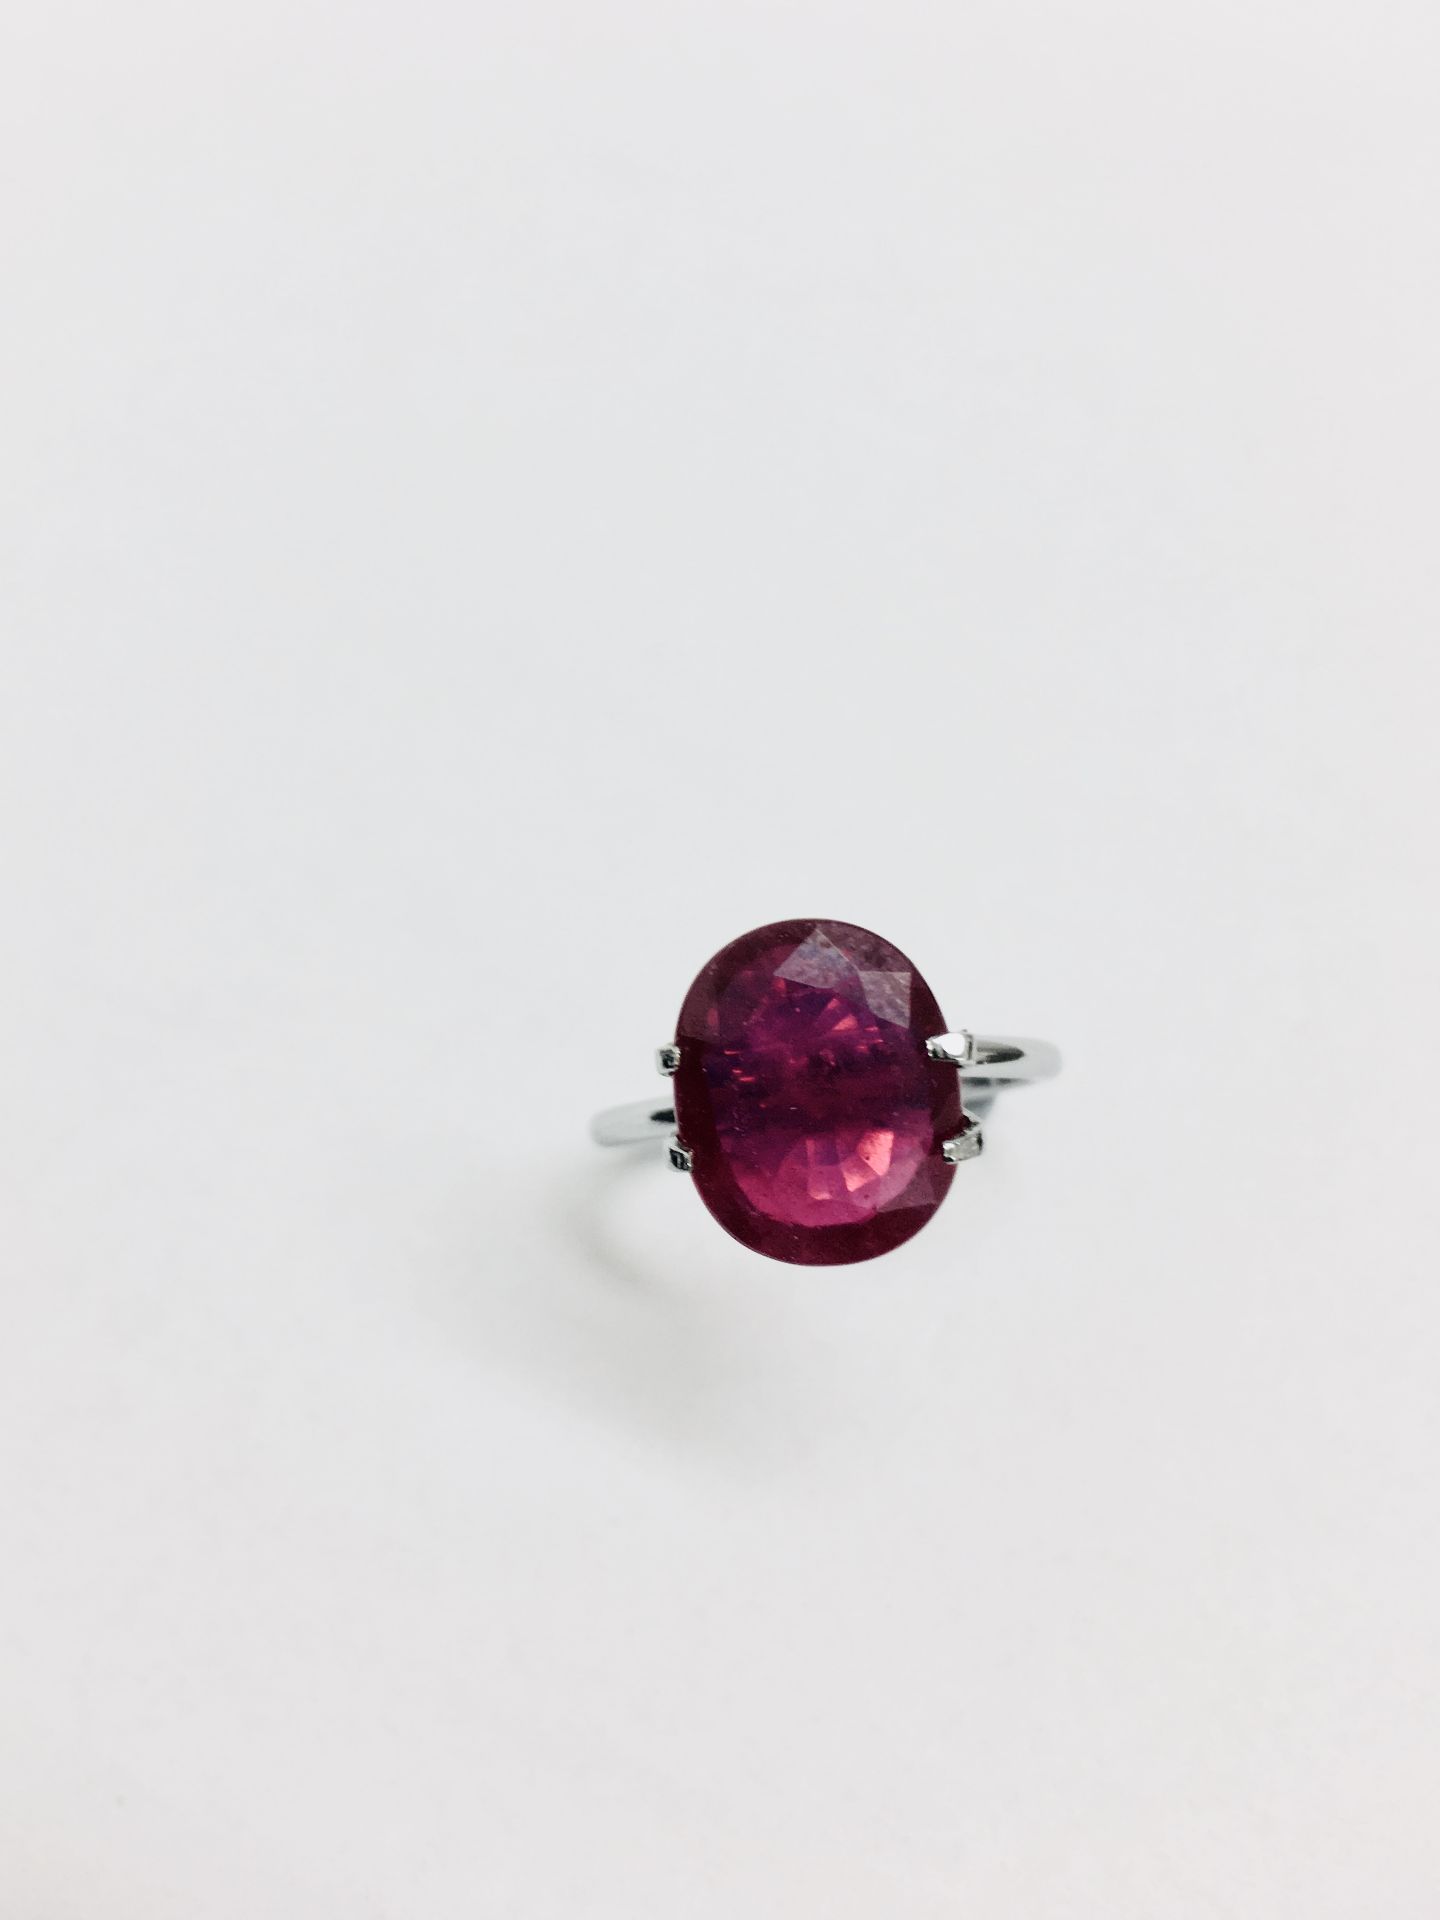 4.90ct ruby,Enhanced by Frature,good clarity and colour,12mmx10mm ,valued at 800 - Image 3 of 3